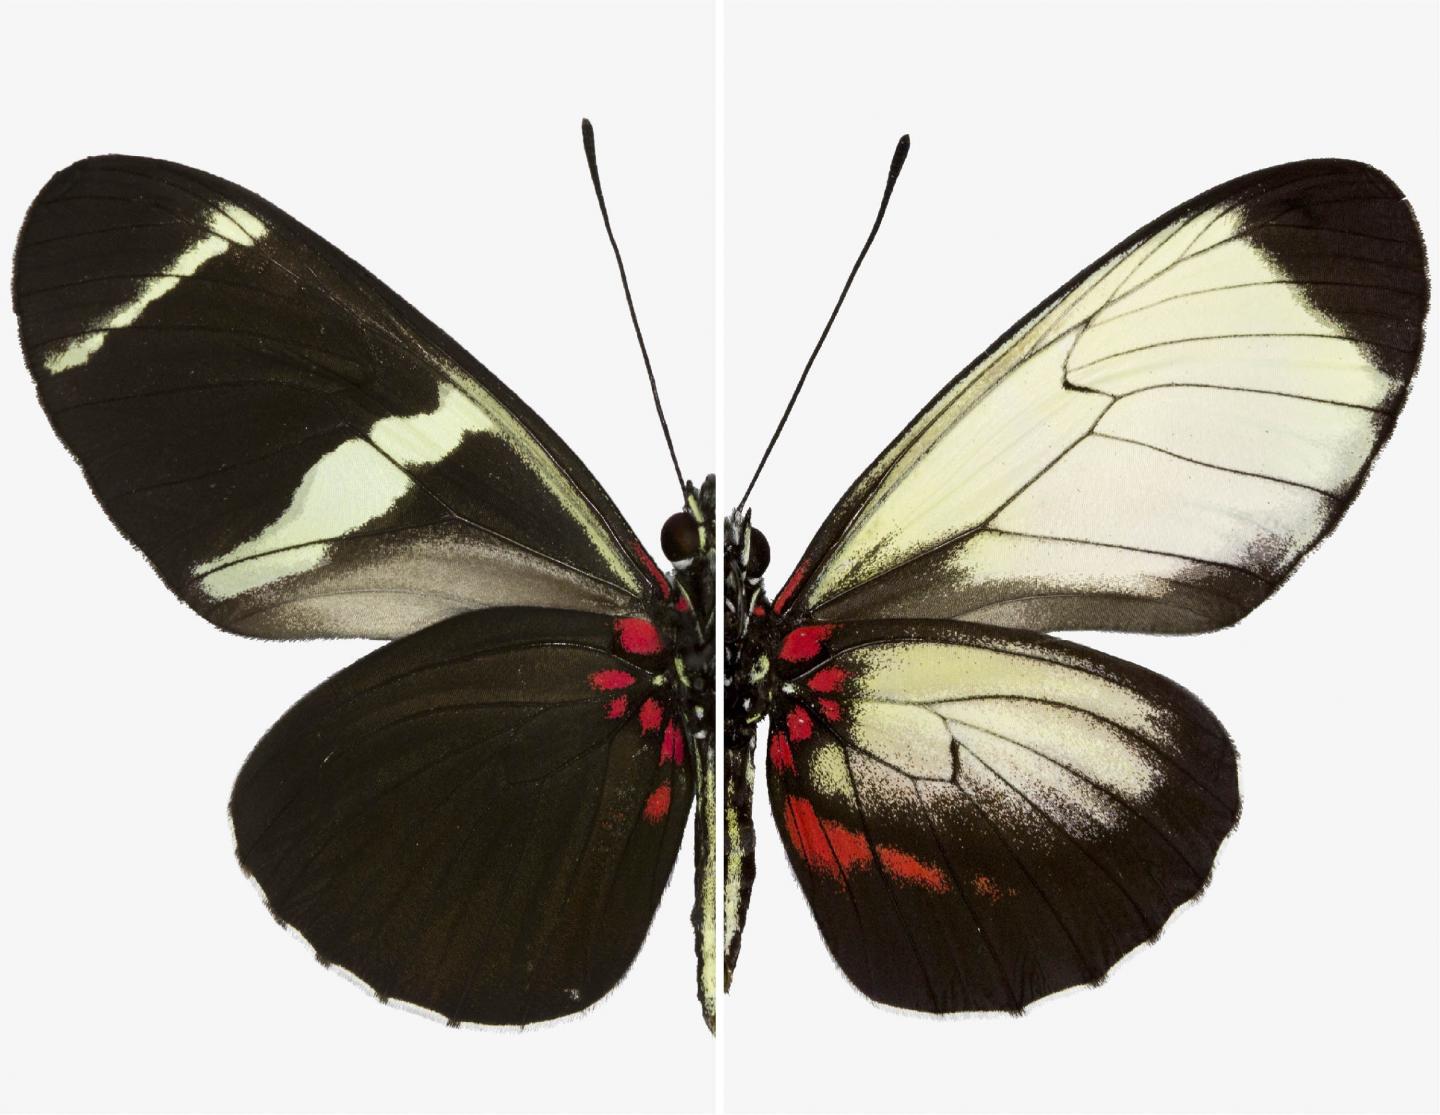 Comparison of Wing Patterns on Two Sara Longwing Butterflies